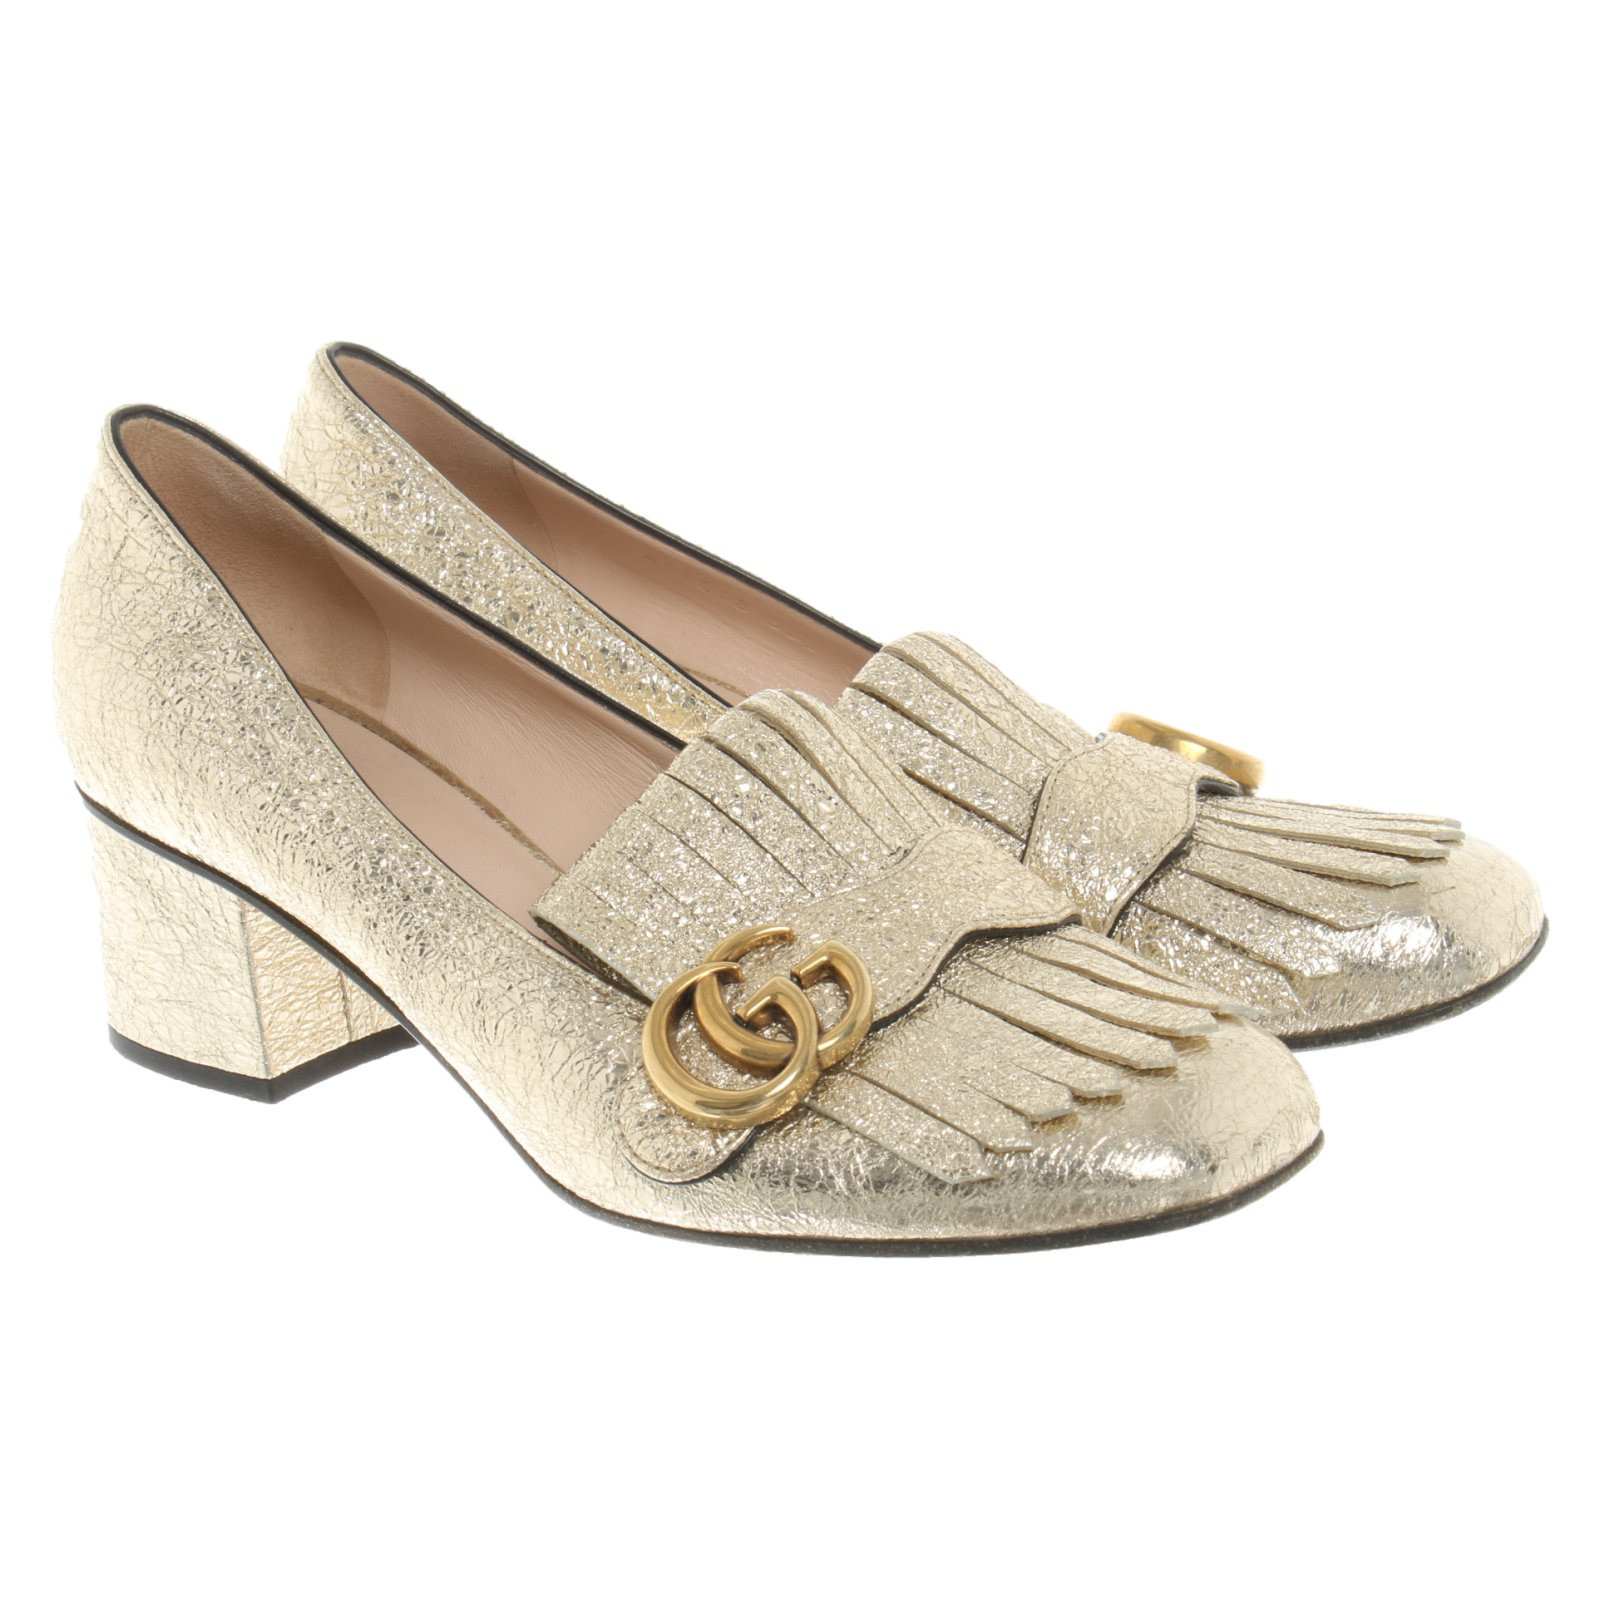 Gucci Pumps Peeptoes Leather In Gold Second Hand Gucci Pumps Peeptoes Leather In Gold Buy Used For 699